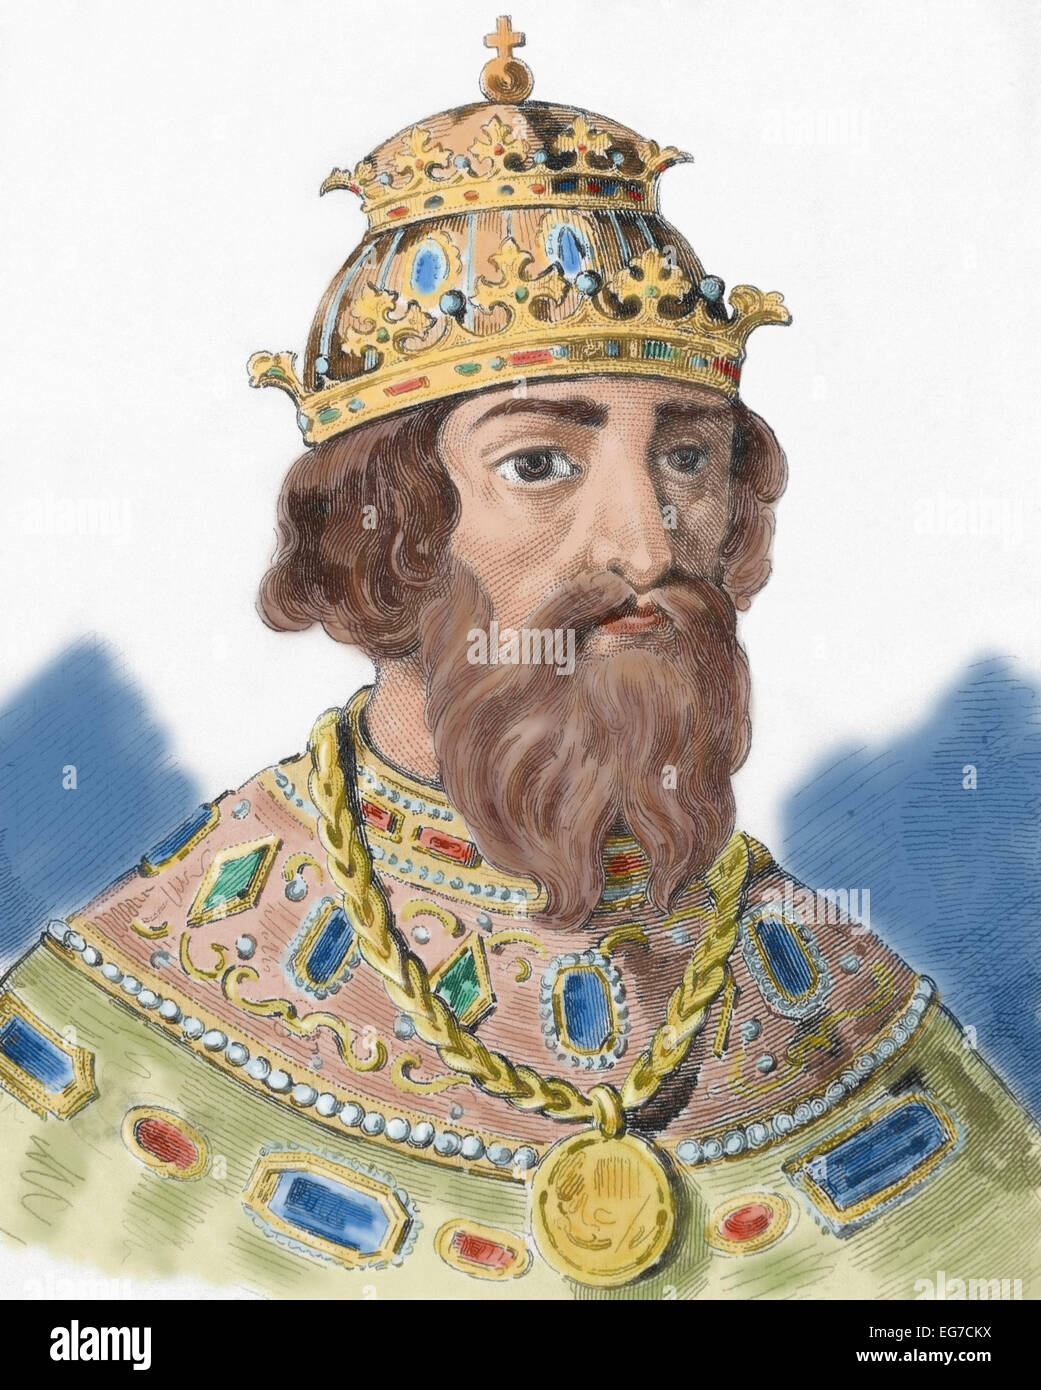 Ivan IV Vasilyevich (1530-1584), known as Ivan the Terrible. Grand Prince of Moscow (1533-1547) and Tsar of All the Russias (1547-1584). Portrait. Engraving. Colored. Stock Photo